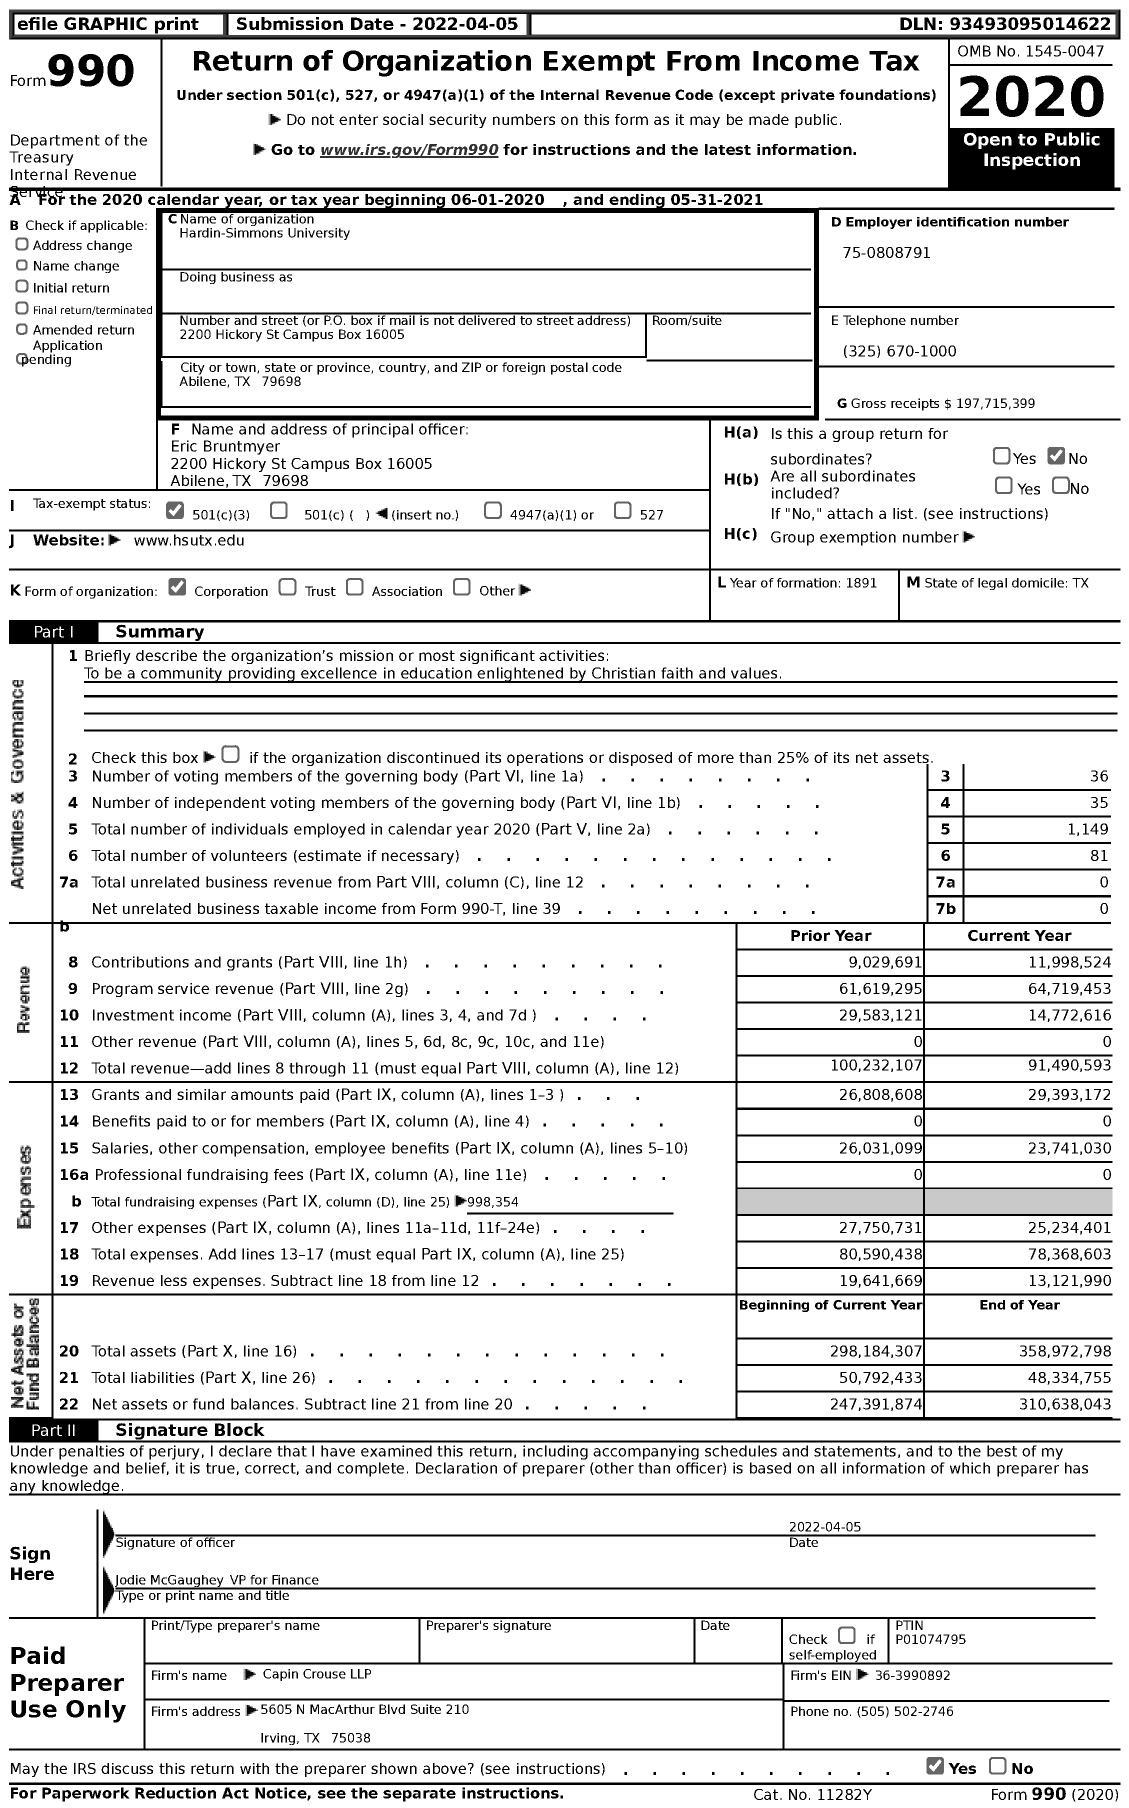 Image of first page of 2020 Form 990 for Hardin-Simmons University (HSU)